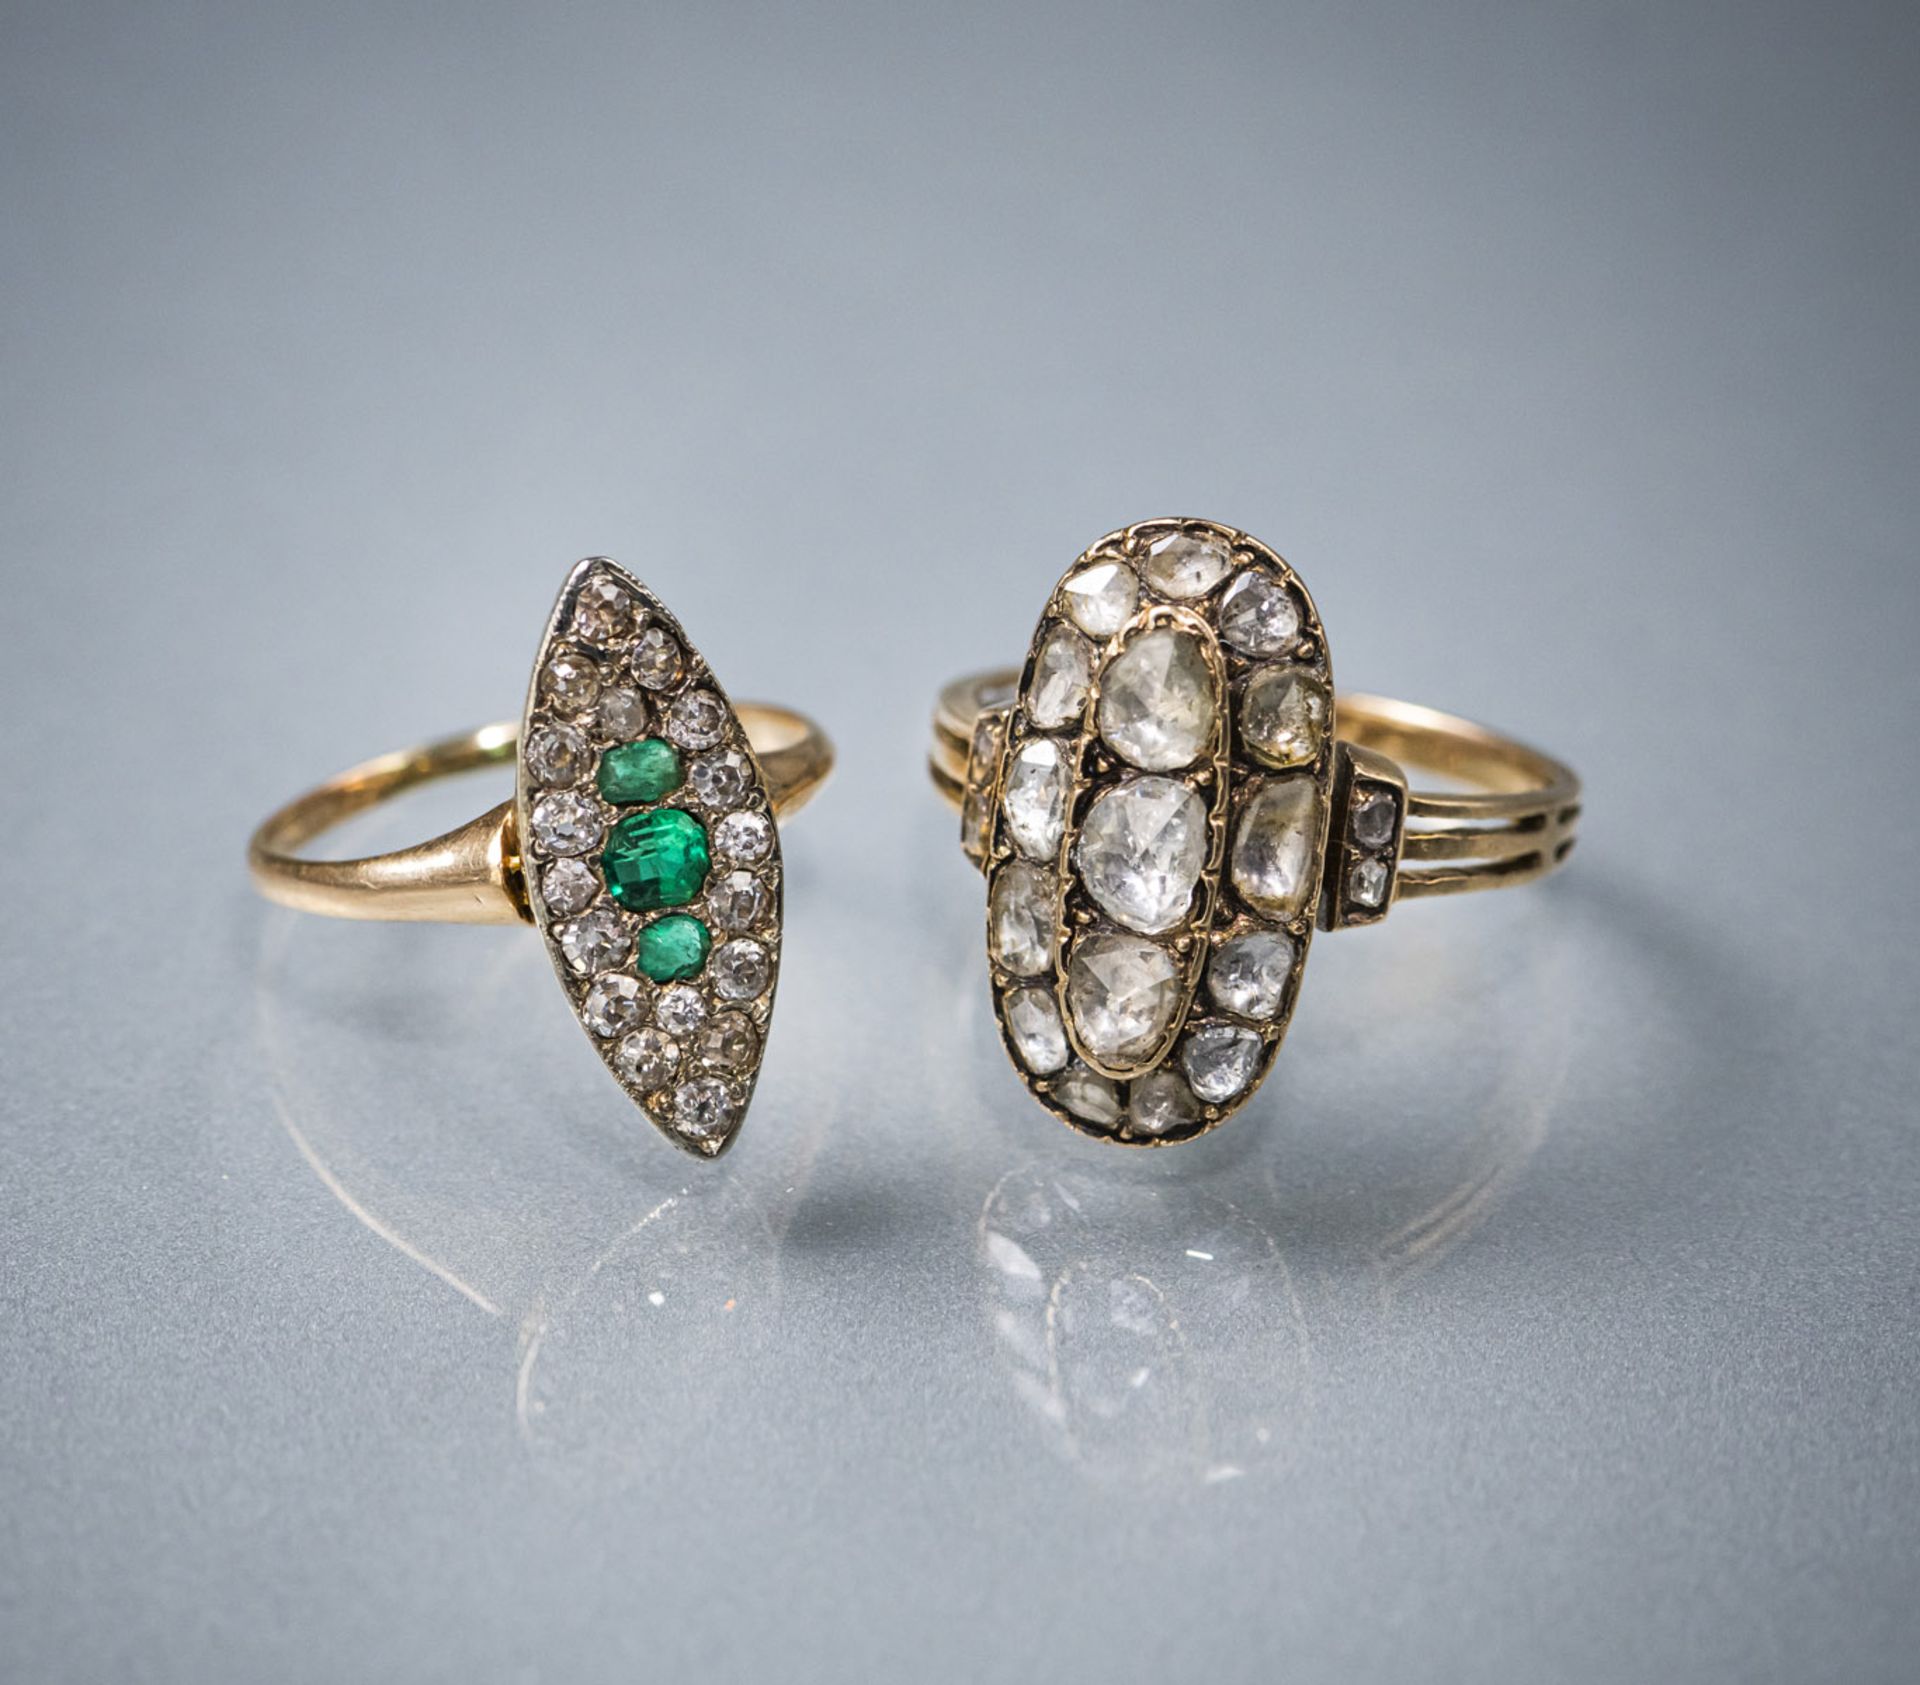 TWO MARQUISE SHAPED RINGS - Image 2 of 3